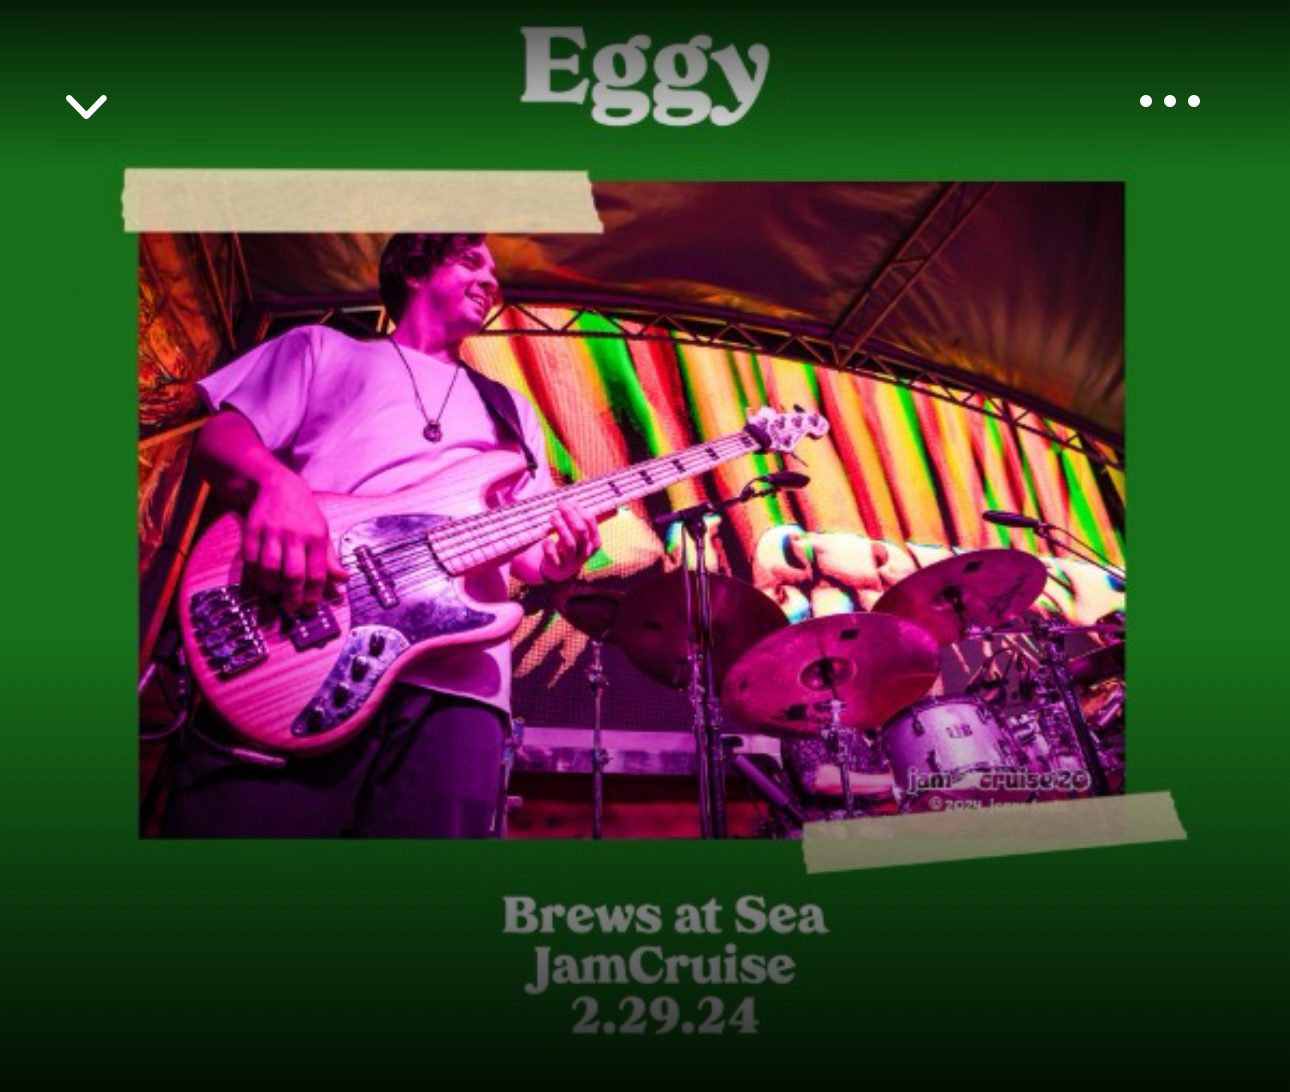 A bassist performing on stage with colorful stage lighting, in front of a drum set with “JamCruise” visible on the drum. The event is labeled “Brews at Sea JamCruise 2.29.24”